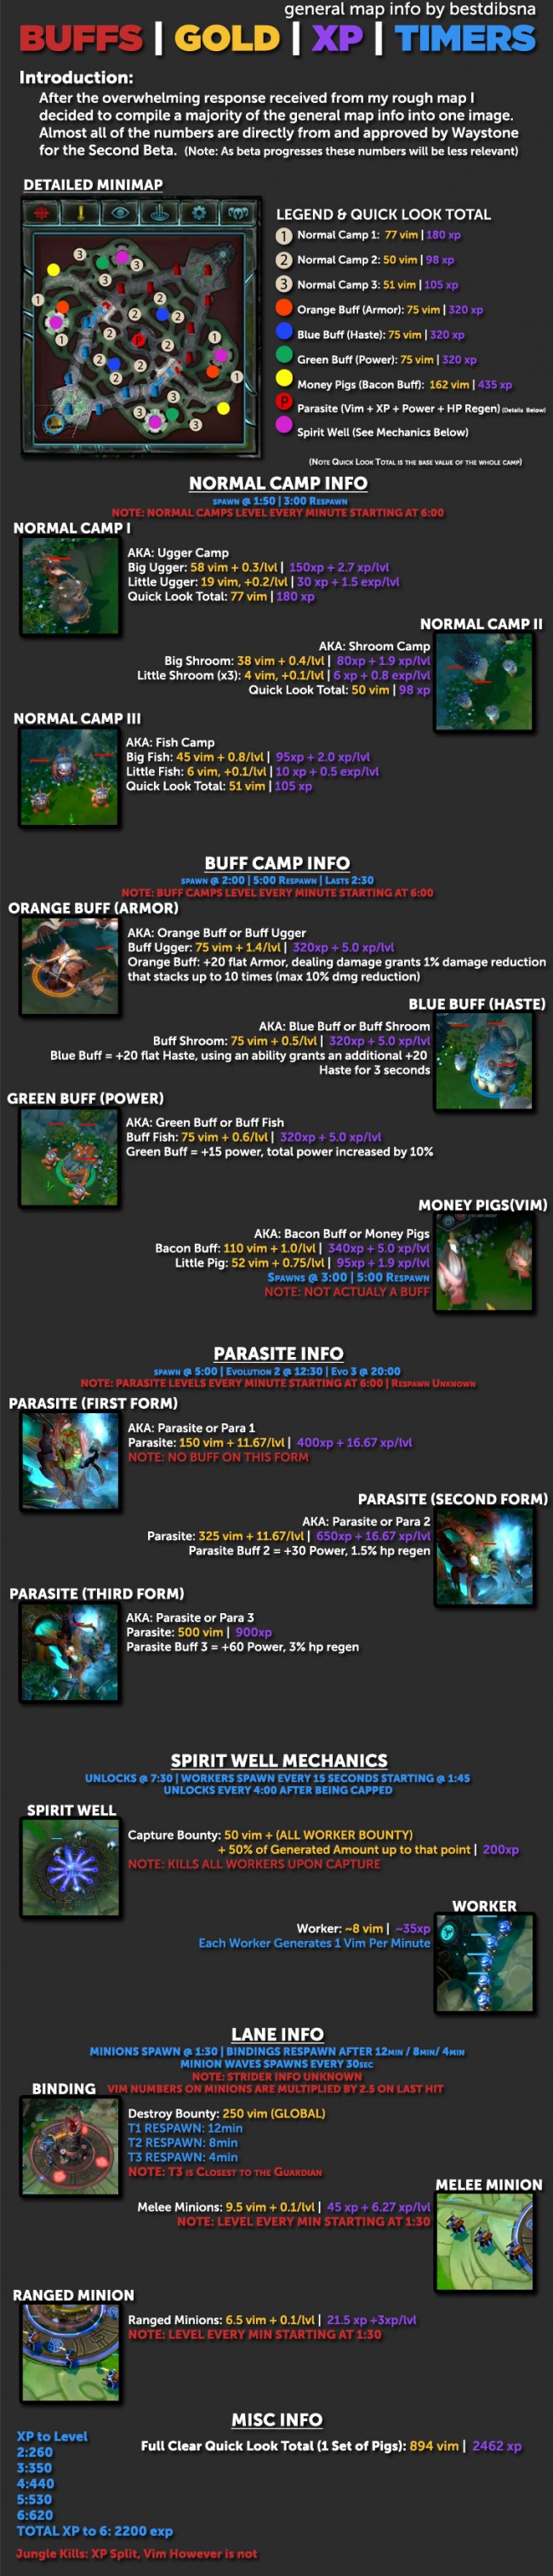 dawngate map infographic